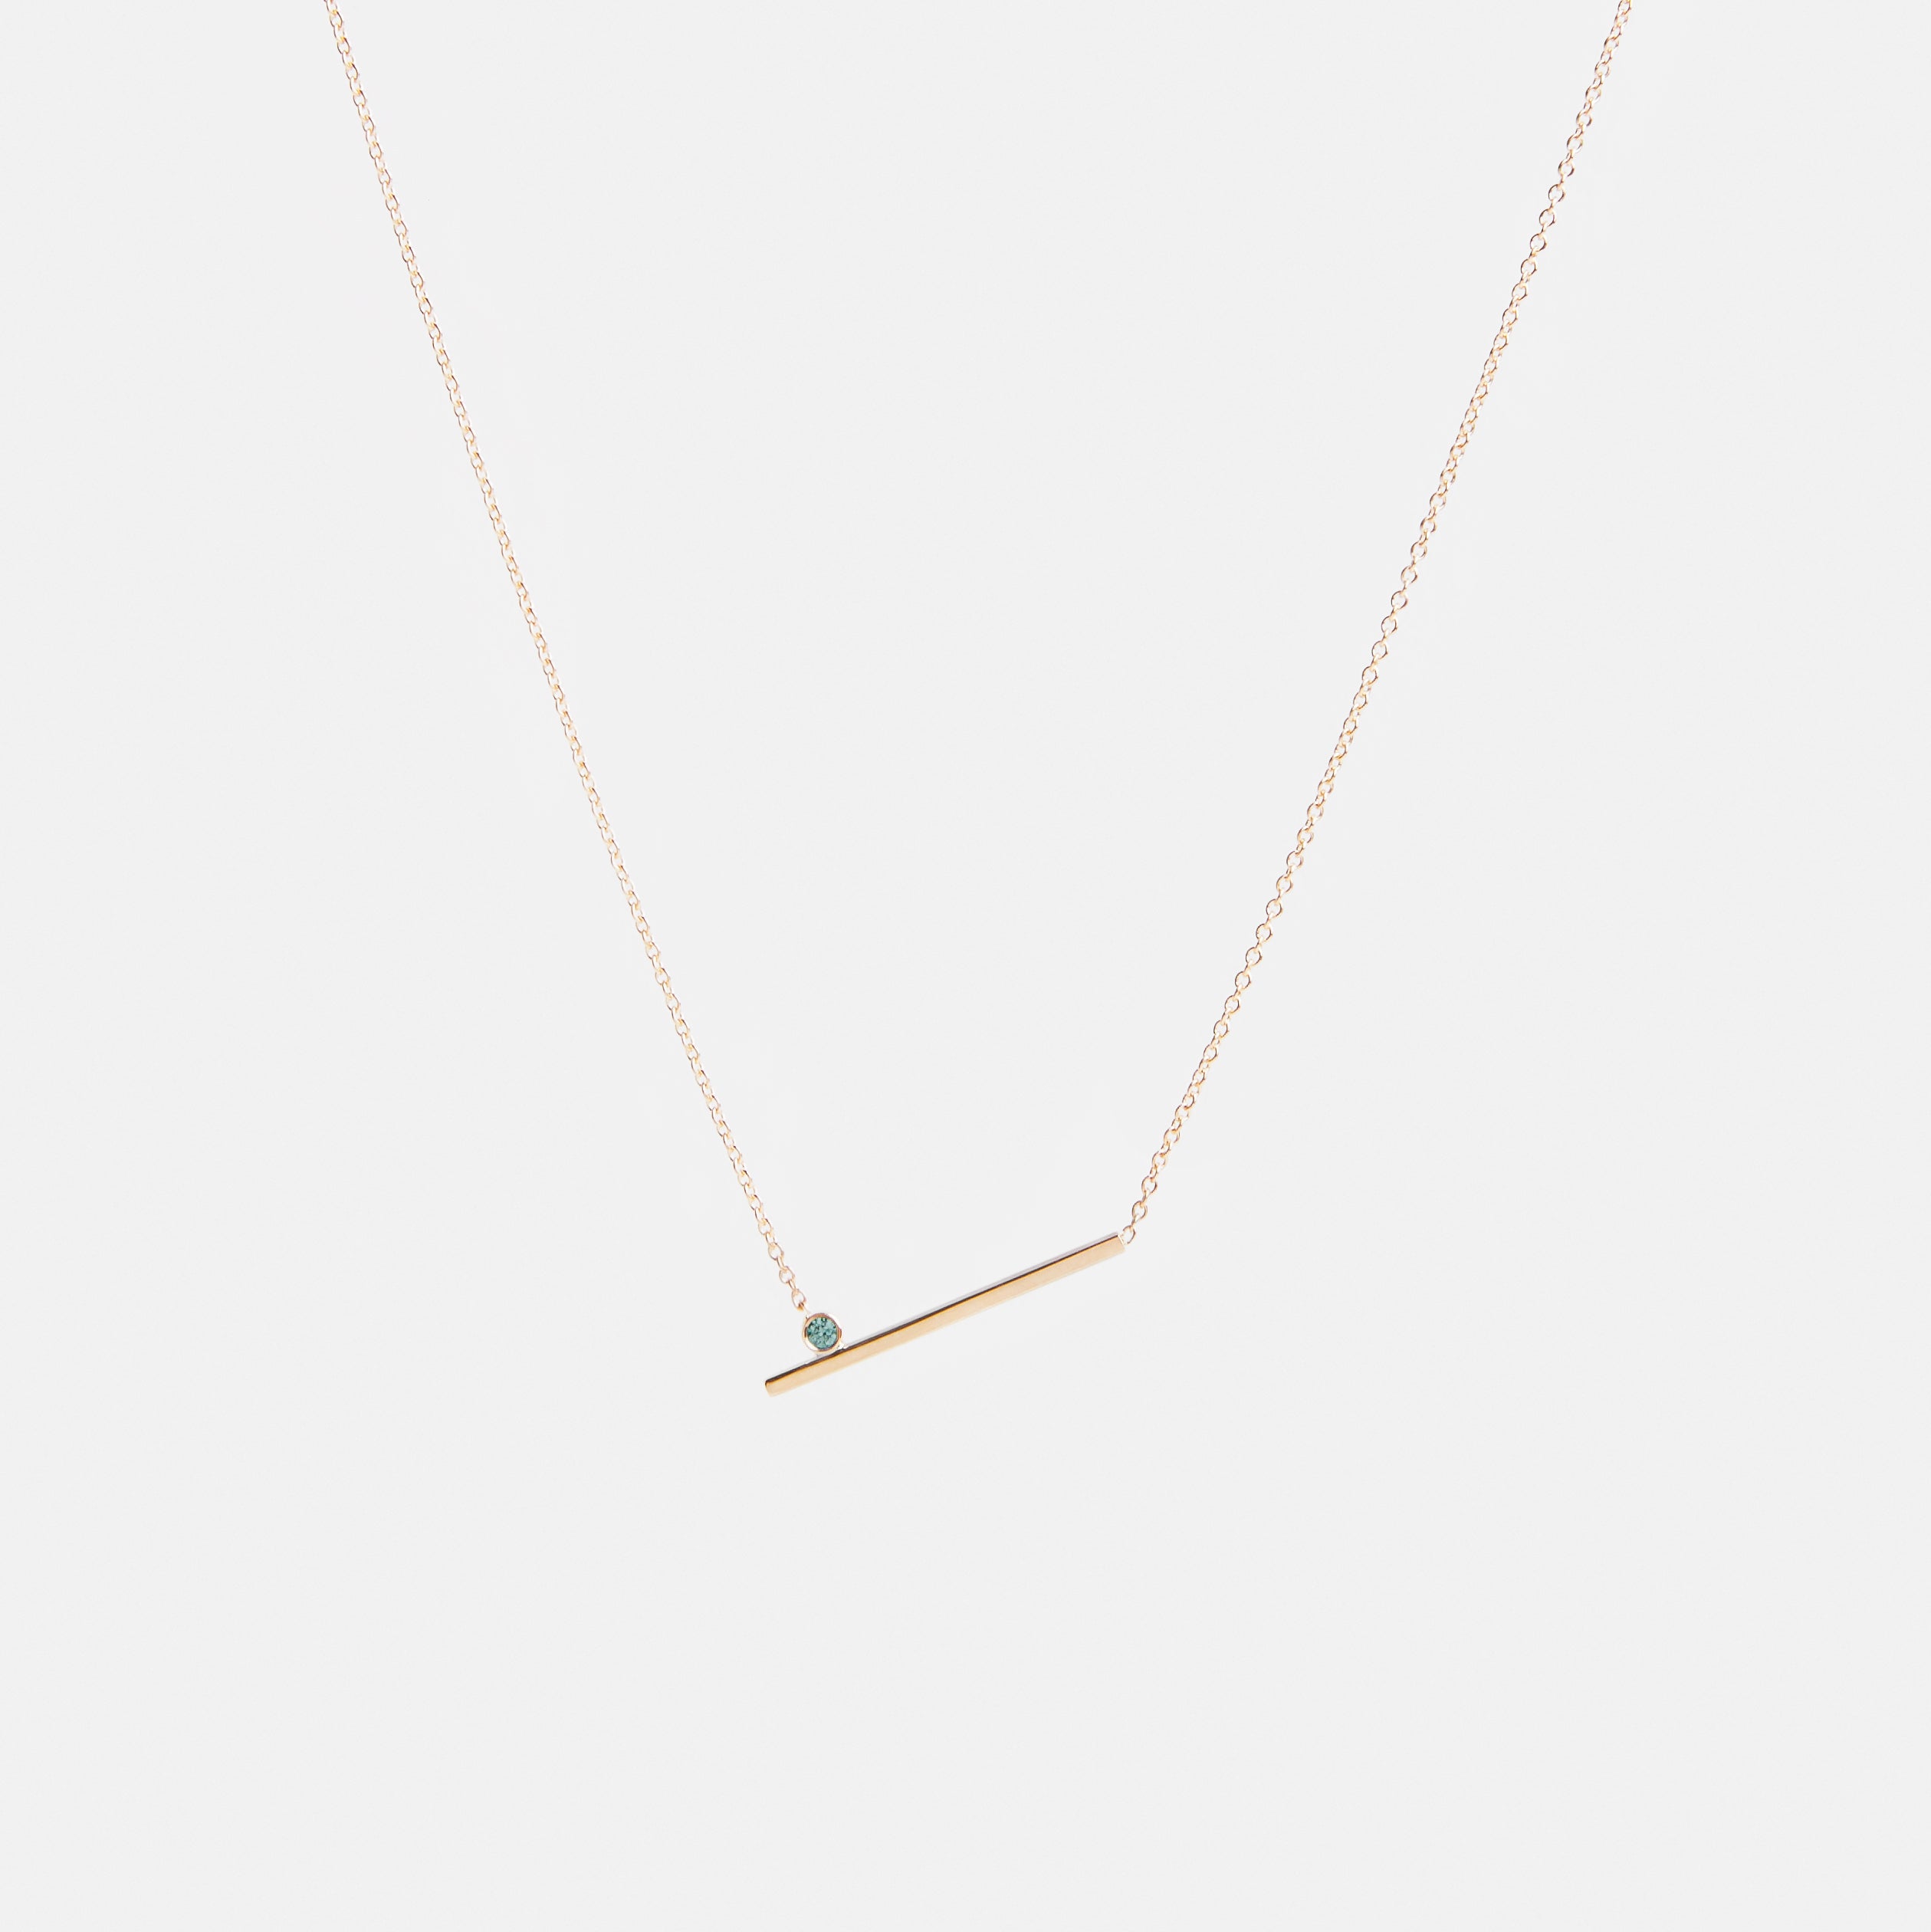 Livi Non-Traditional Necklace in 14k Gold Set with Green Diamond By SHW Fine Jewelry New York City